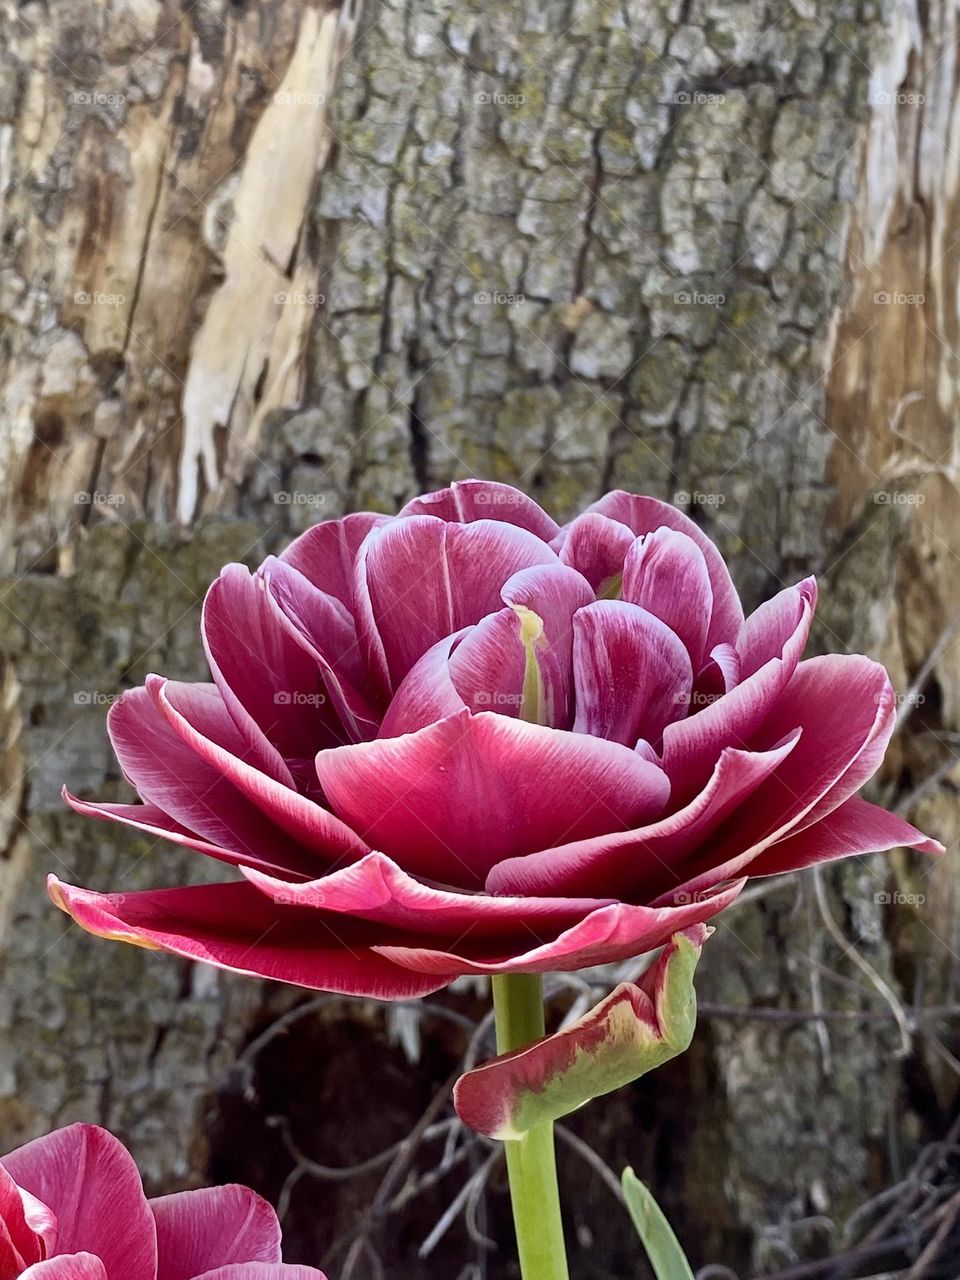 A bright pink tulip growing in front of a tree stump